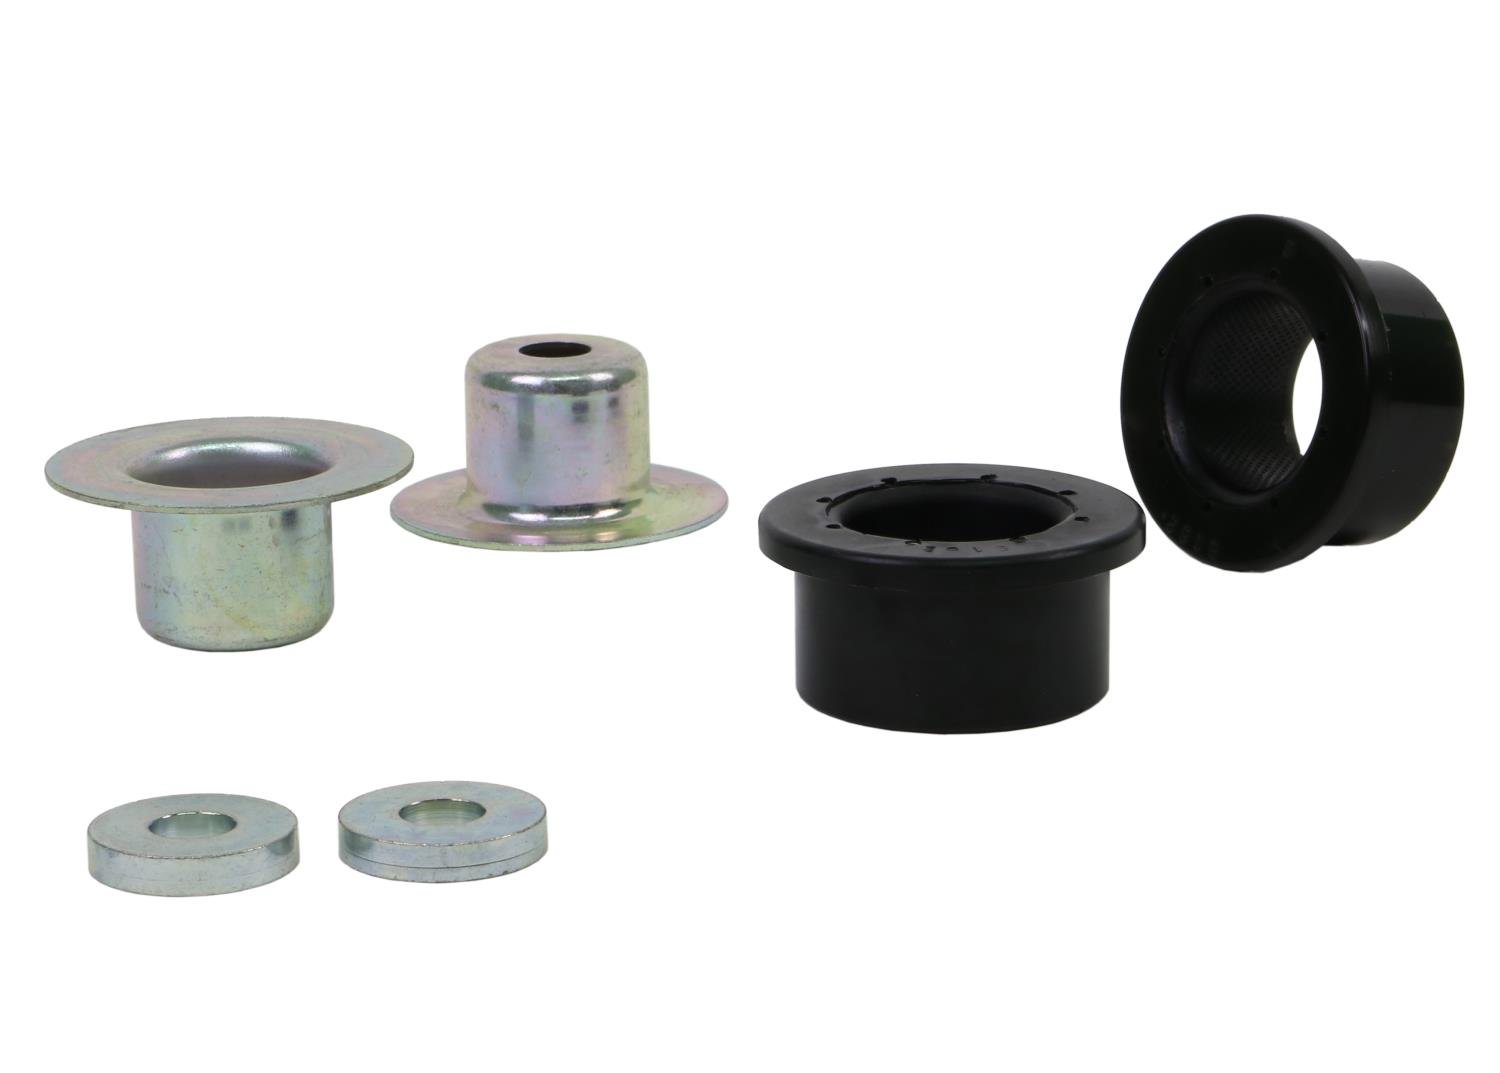 KDT913 Rear Diff Support Rear Bushing for 1995-2002 Nissan 200SX, 1990-1998 300ZX, 1990-2002 Skyline